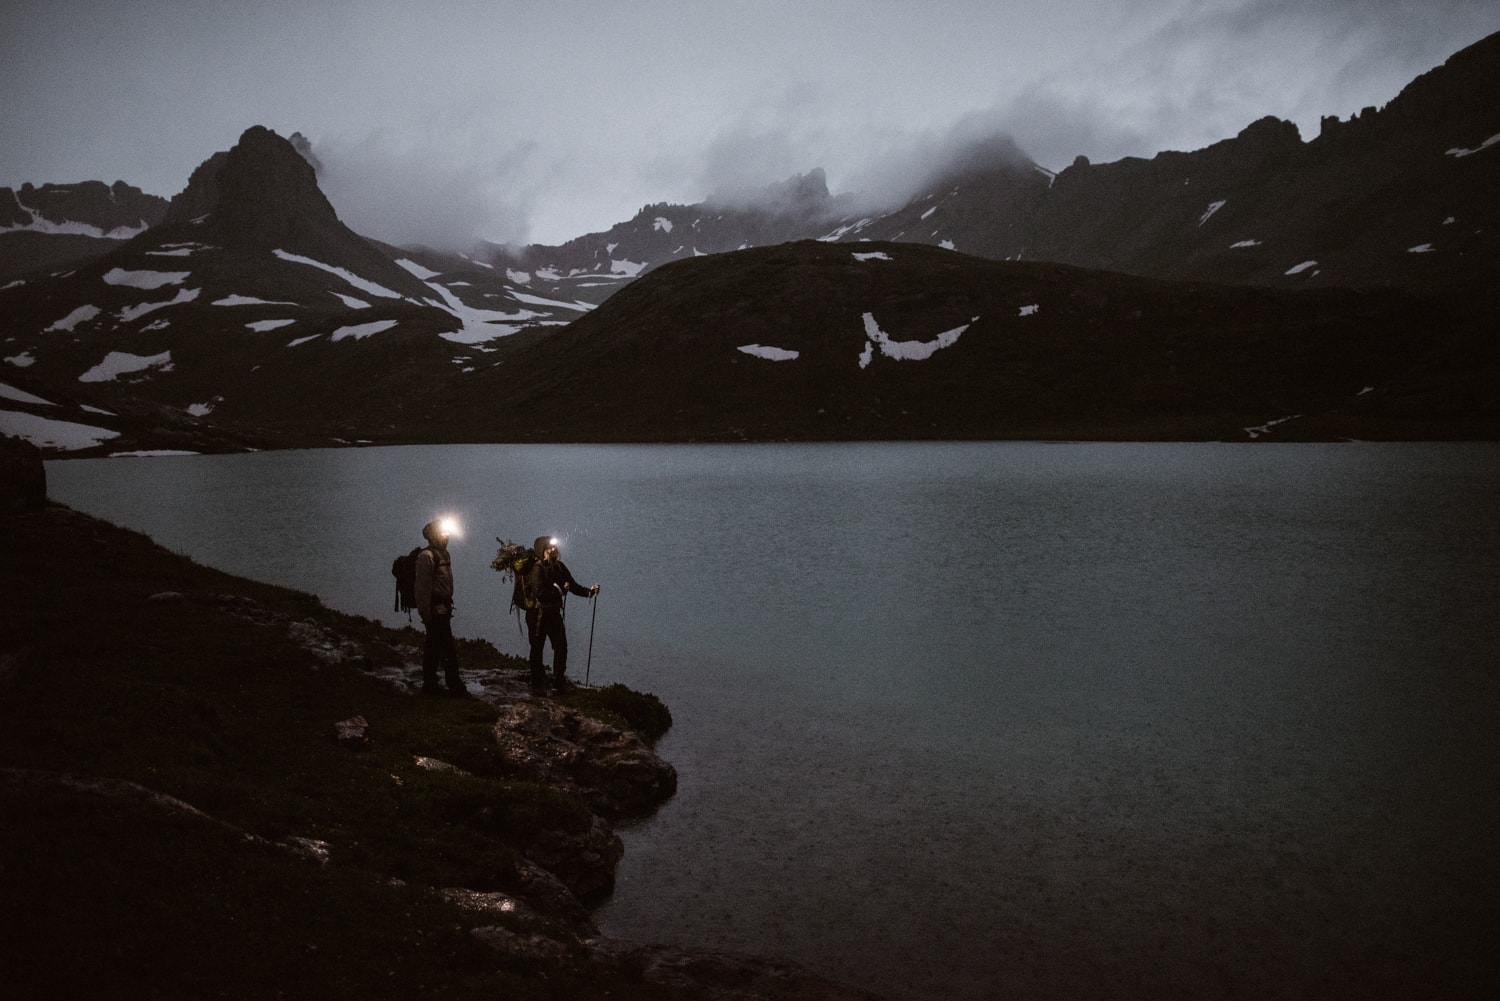 Bride and groom standing at the edge of an alpine lake in the dark. They are wearing headlamps and there are snow-covered mountains in the background. 